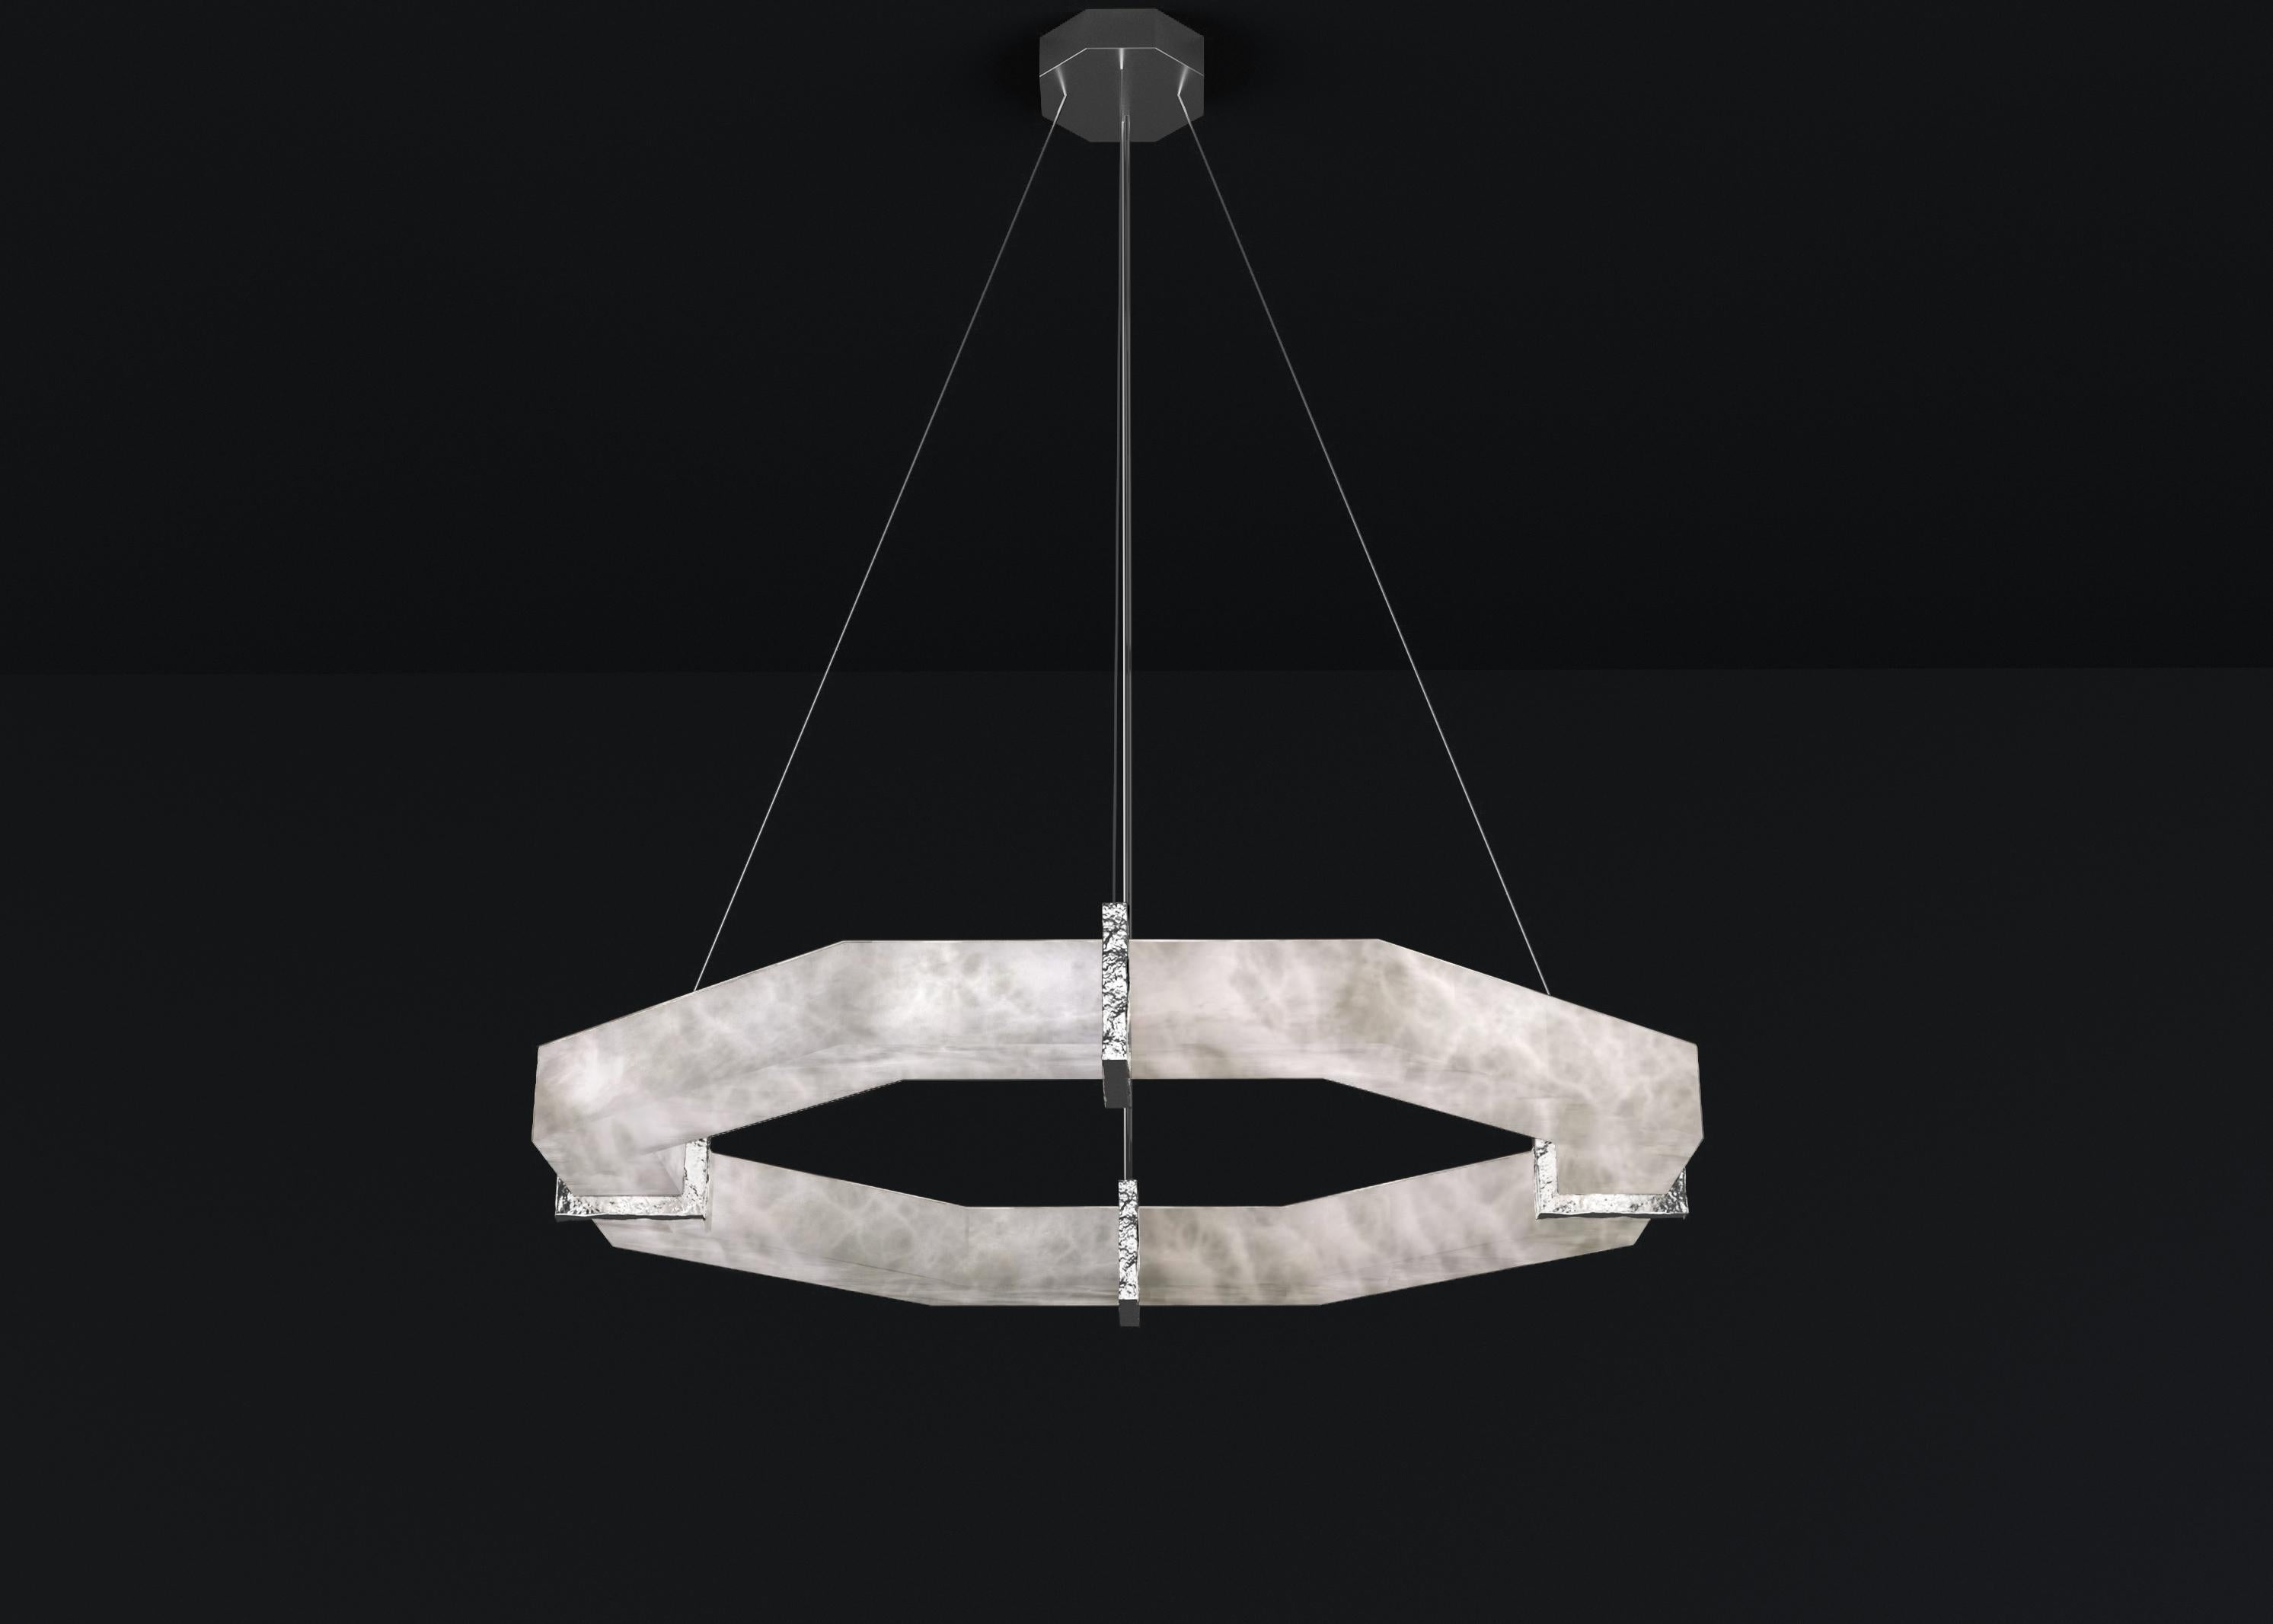 Efesto Shiny Silver Metal Pendant Lamp by Alabastro Italiano
Dimensions: D 83 x W 80 x H 11 cm.
Materials: White alabaster and metal.

Available in different finishes: Shiny Silver, Bronze, Brushed Brass, Ruggine of Florence, Brushed Burnished,